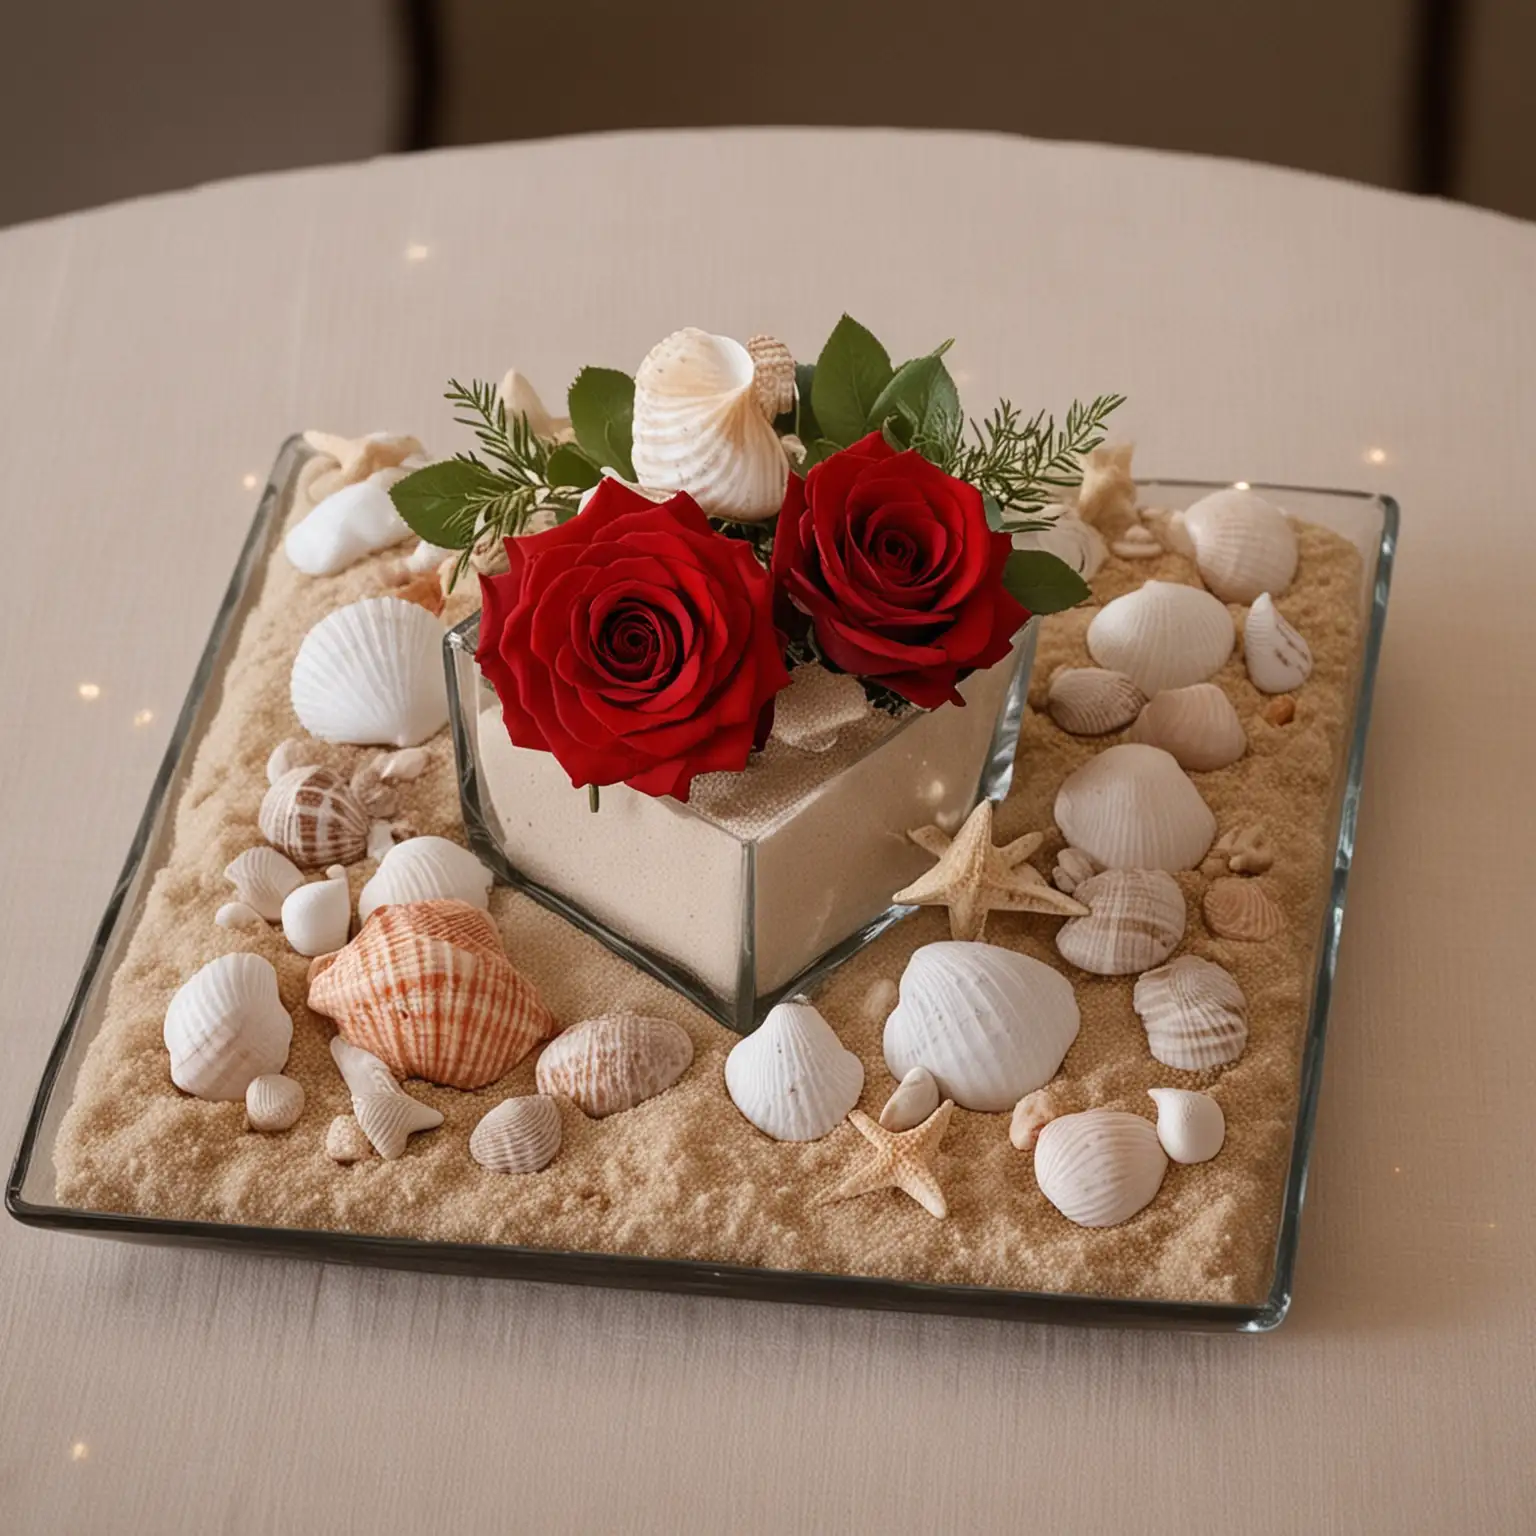 red rose and sand and seashell centerpiece in a square vase for wedding table; keep background neutral